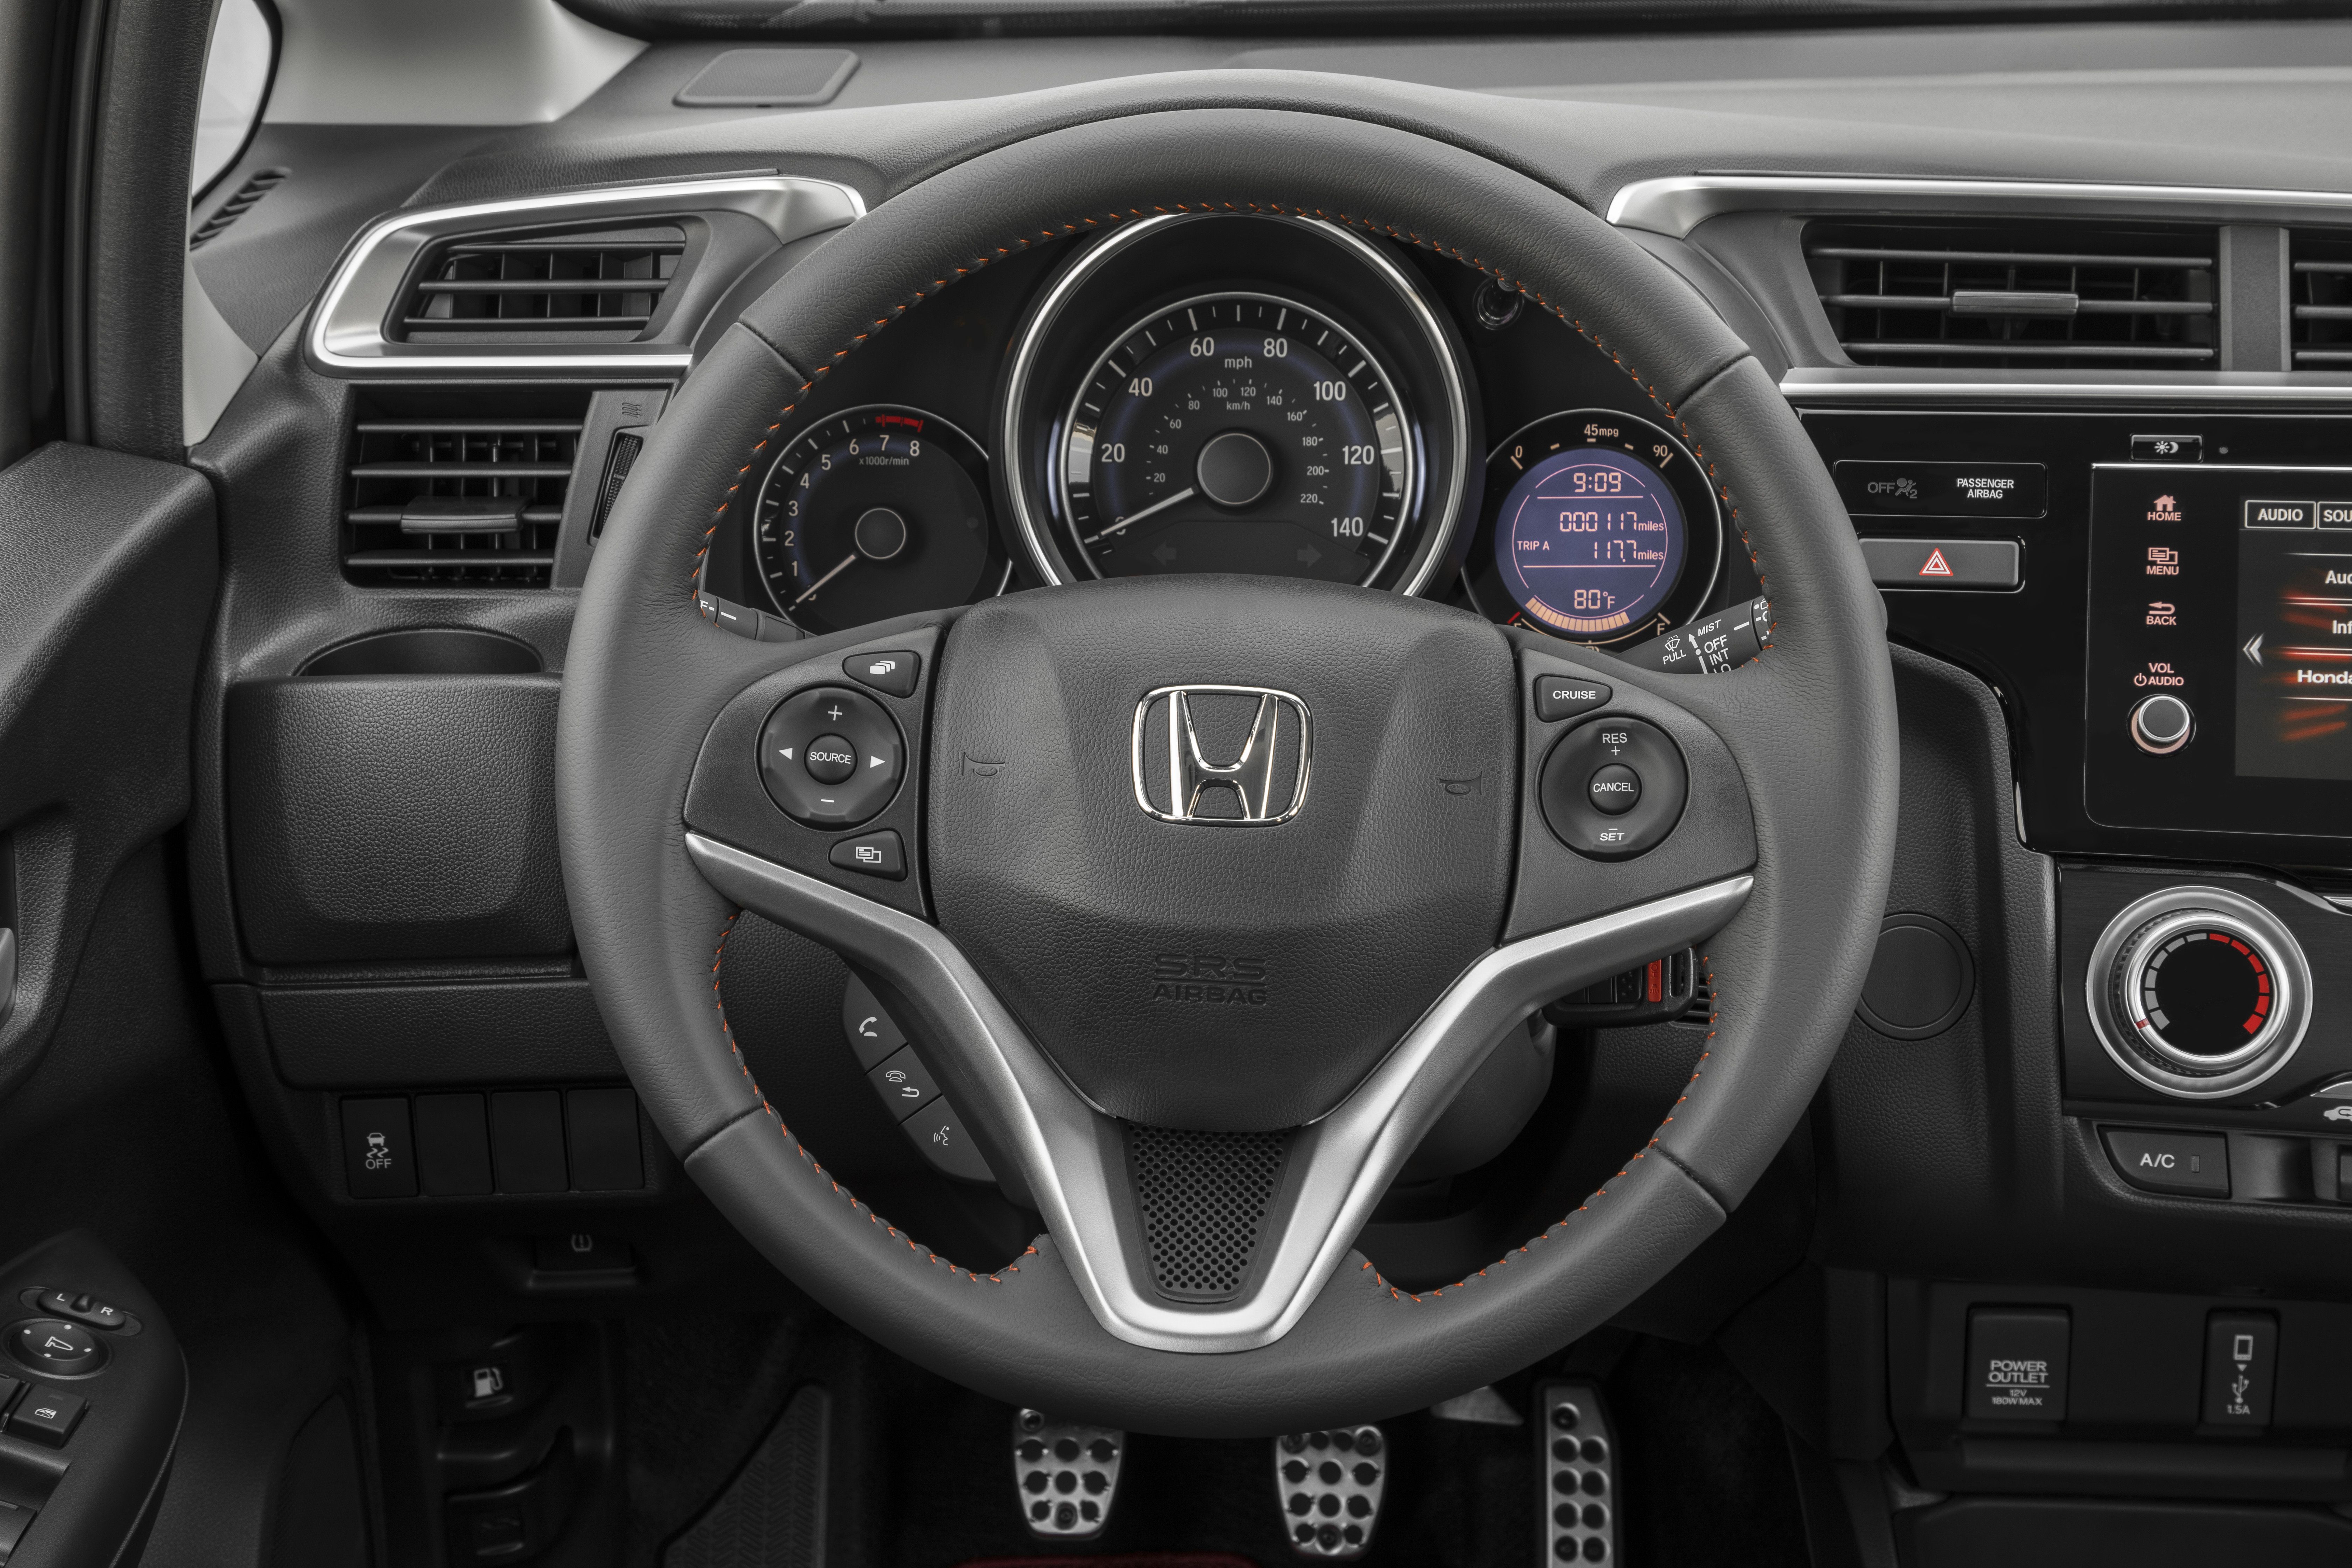 2020 Honda Fit Review Pricing And Specs